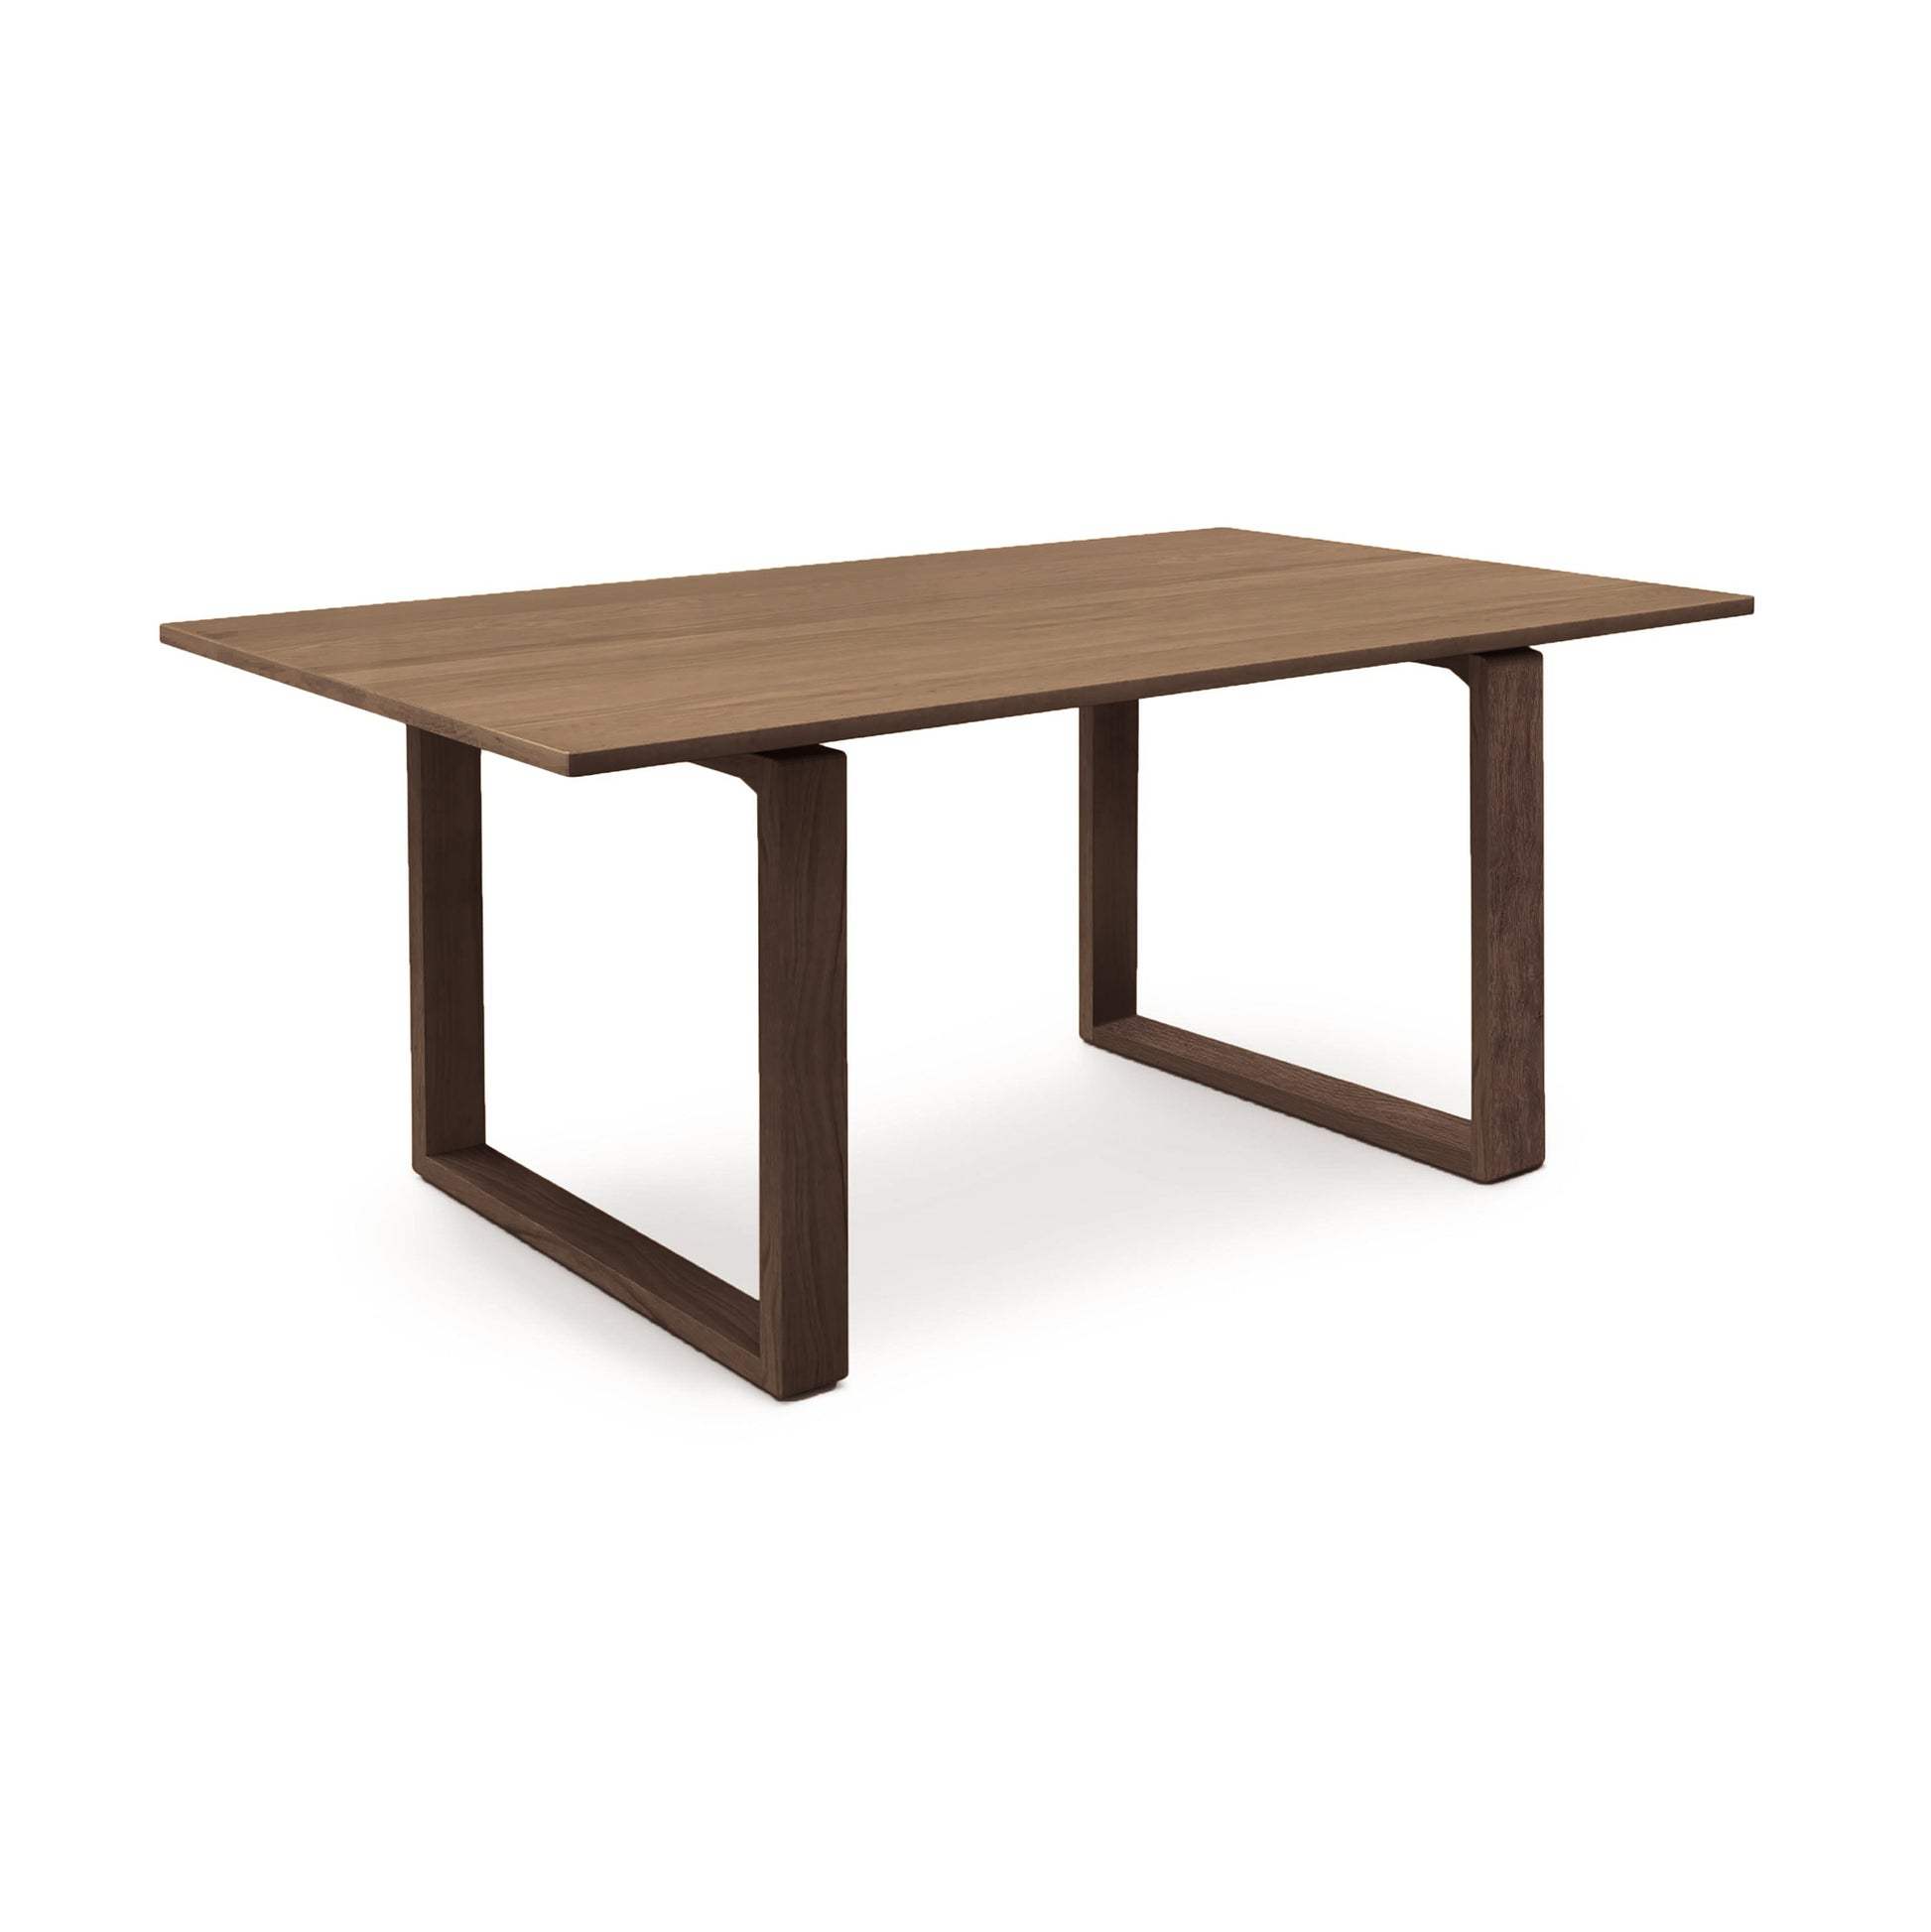 A minimalist Copeland Furniture Iso Oak Solid Top Dining Table with a rectangular top and two wide, inverted u-shaped legs on a white background, crafted from sustainably sourced North American hardwoods.